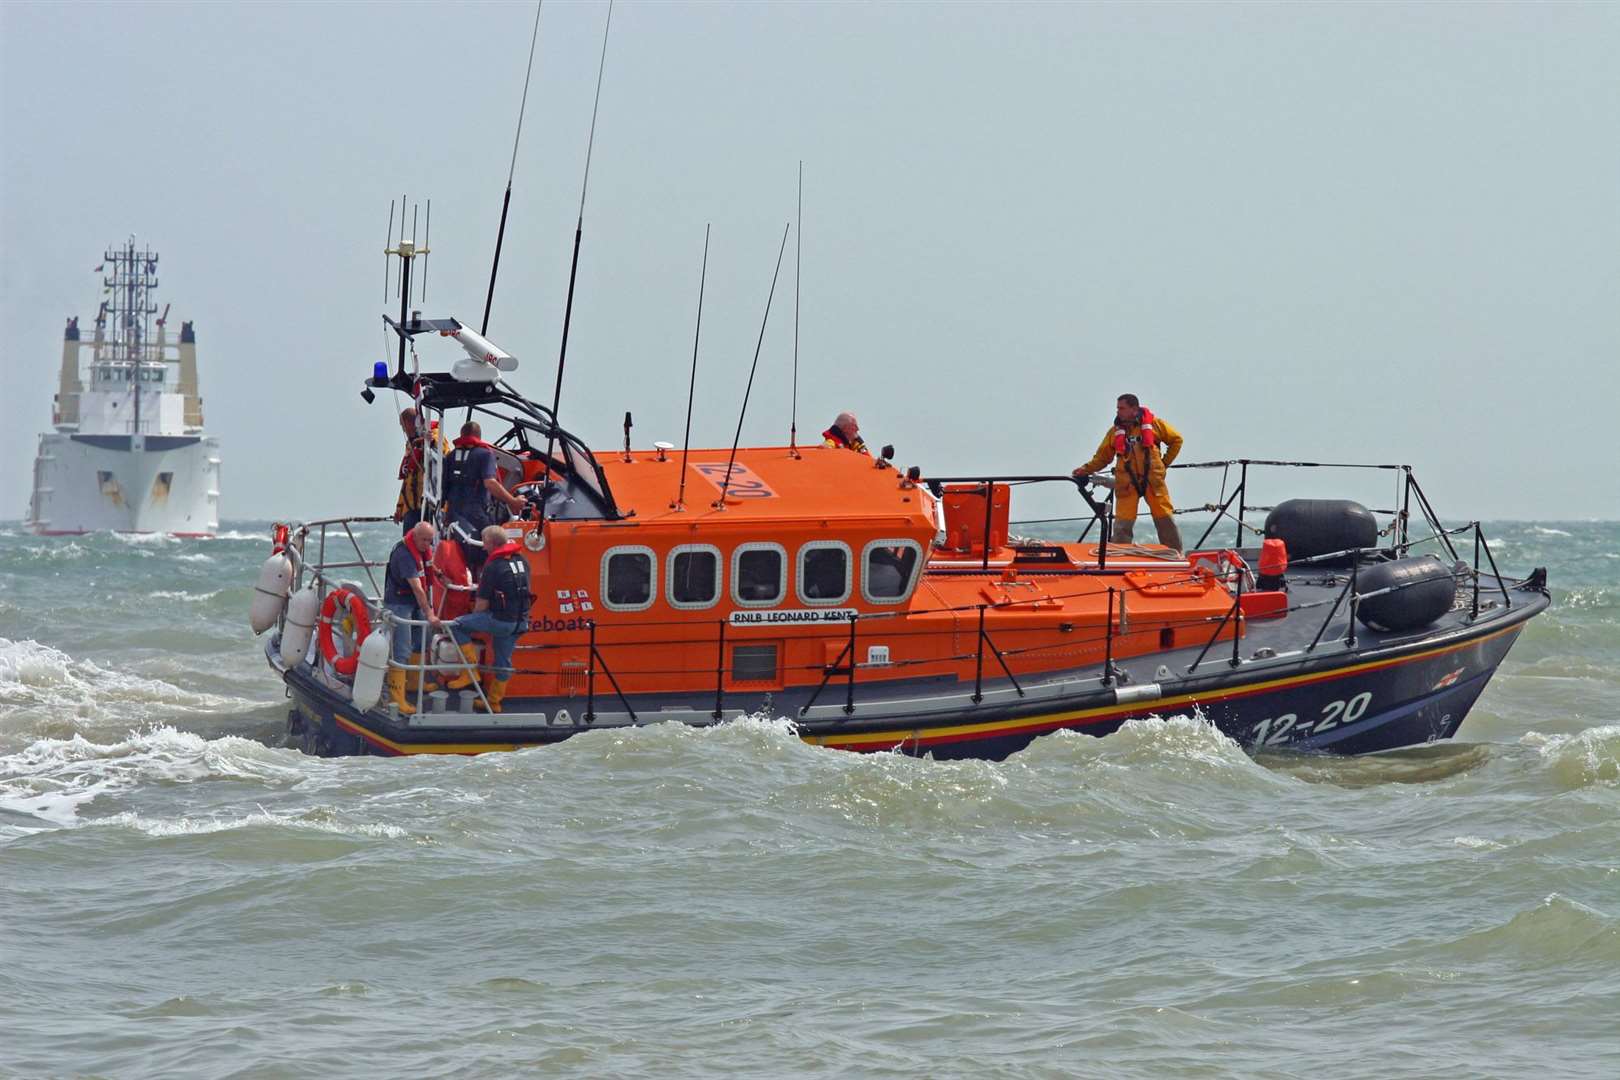 The Margate RNLI all-weather lifeboat Leonard Kent at sea. Library picture:: RNLI Margate